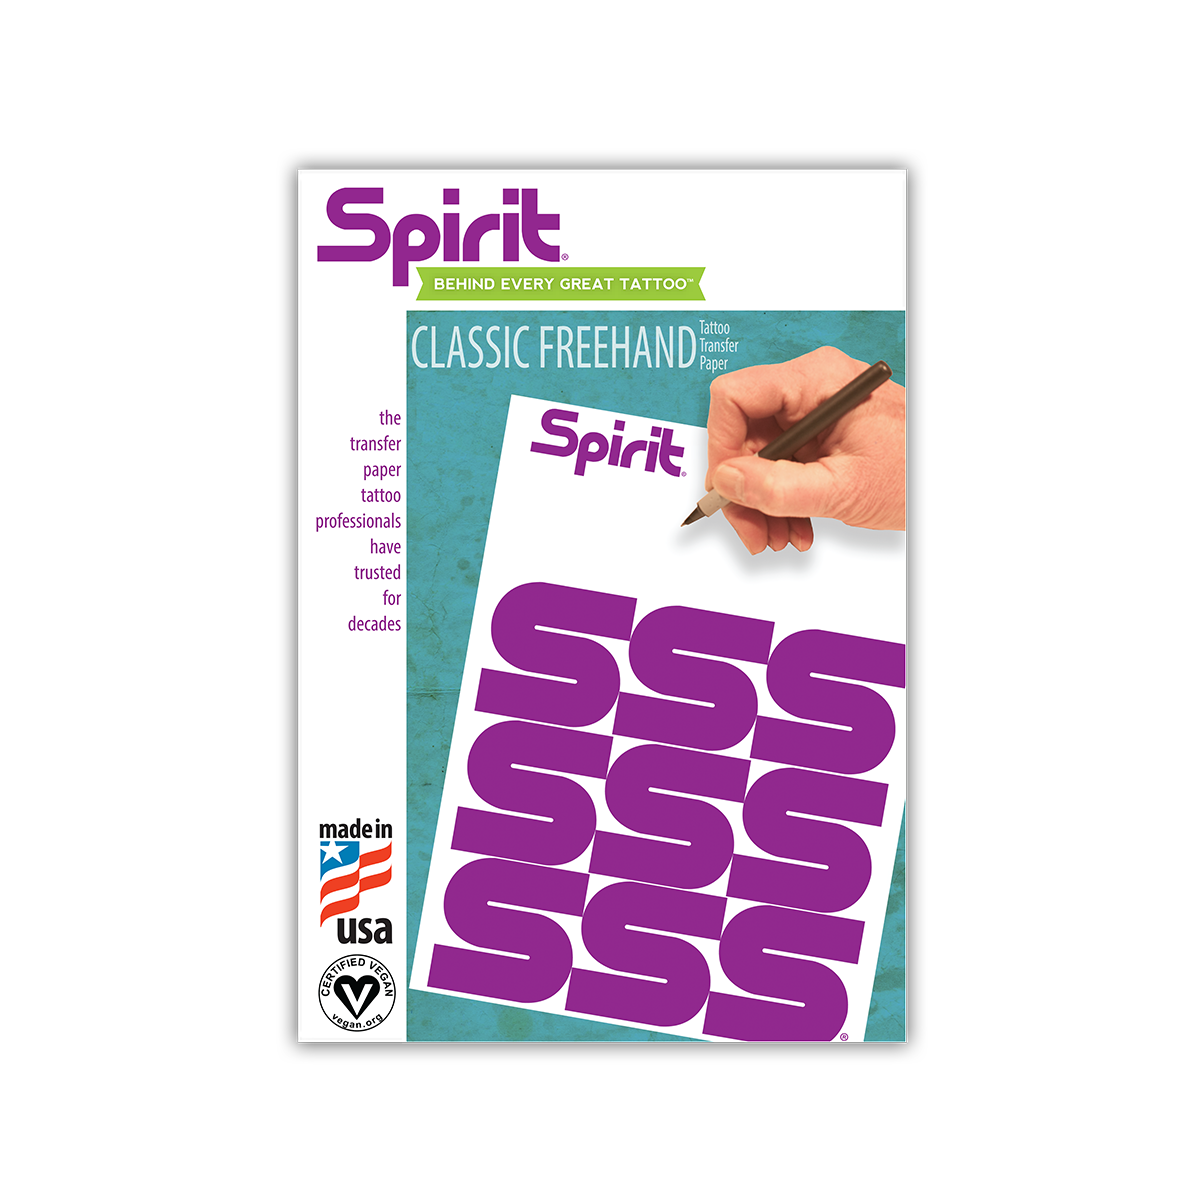 Spirit Classic Freehand Transfer Paper (100 Sheets)